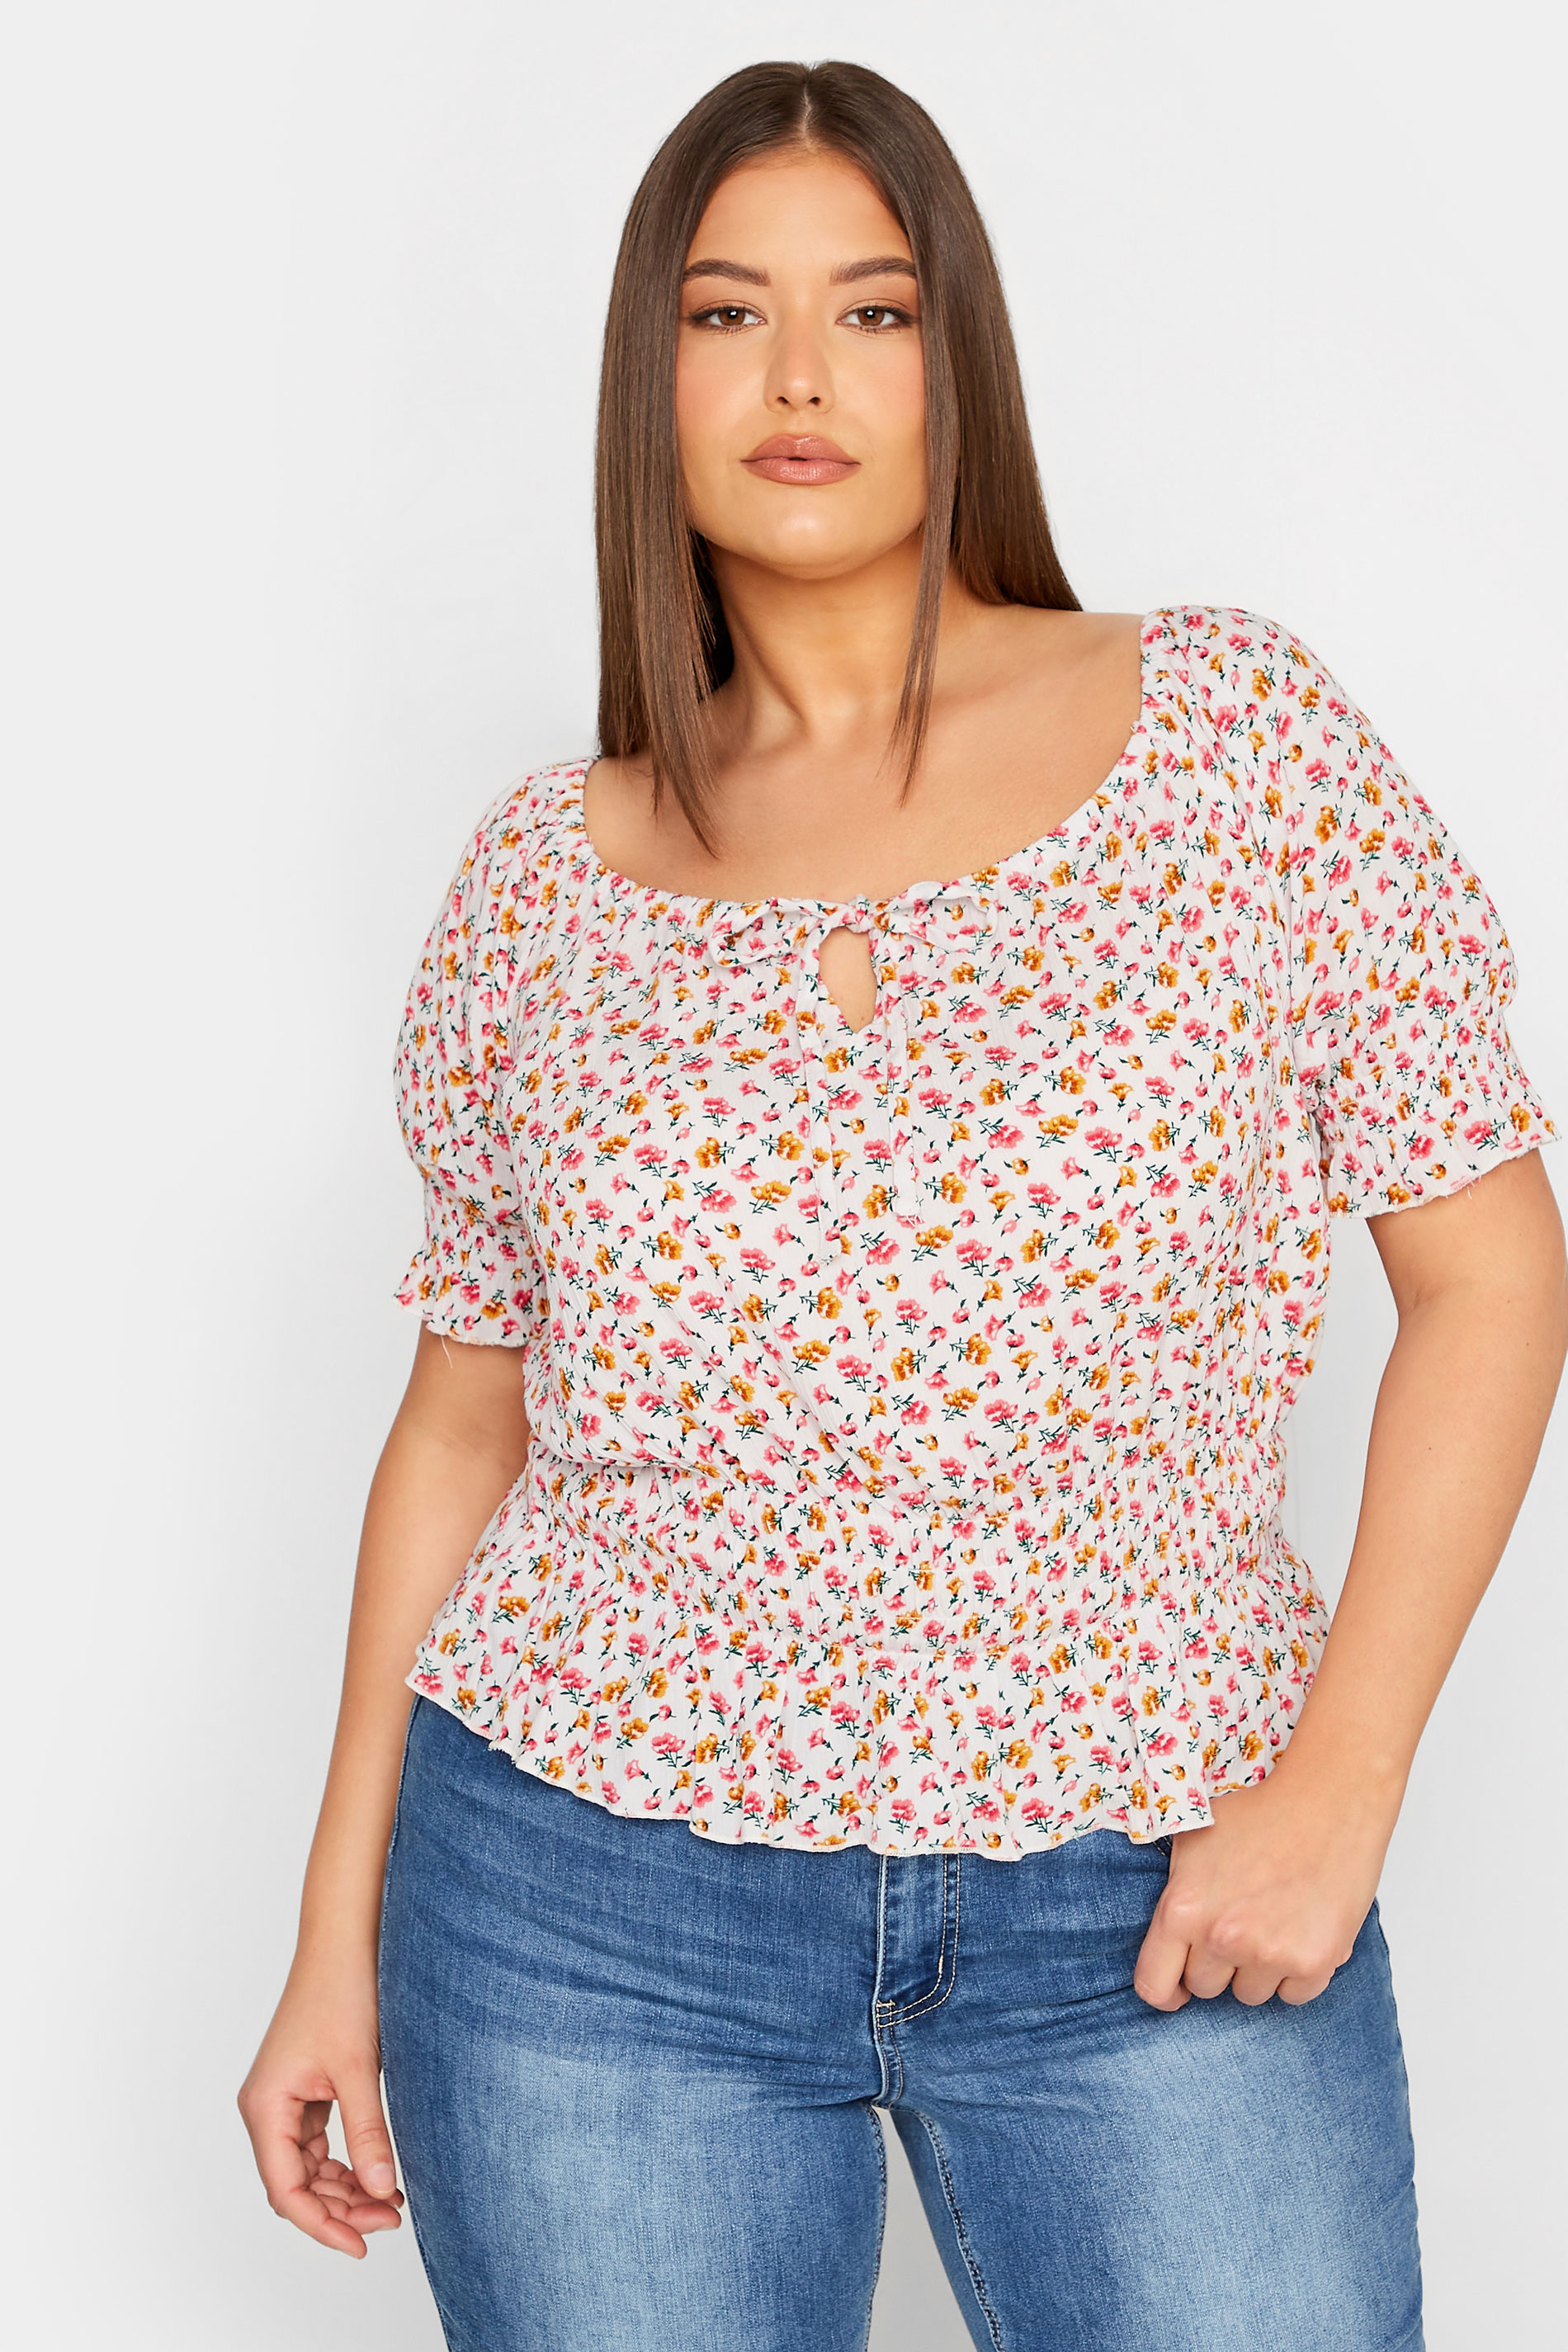 LTS Tall White Floral Crinkle Bardot Top | Long Tall Sally 1